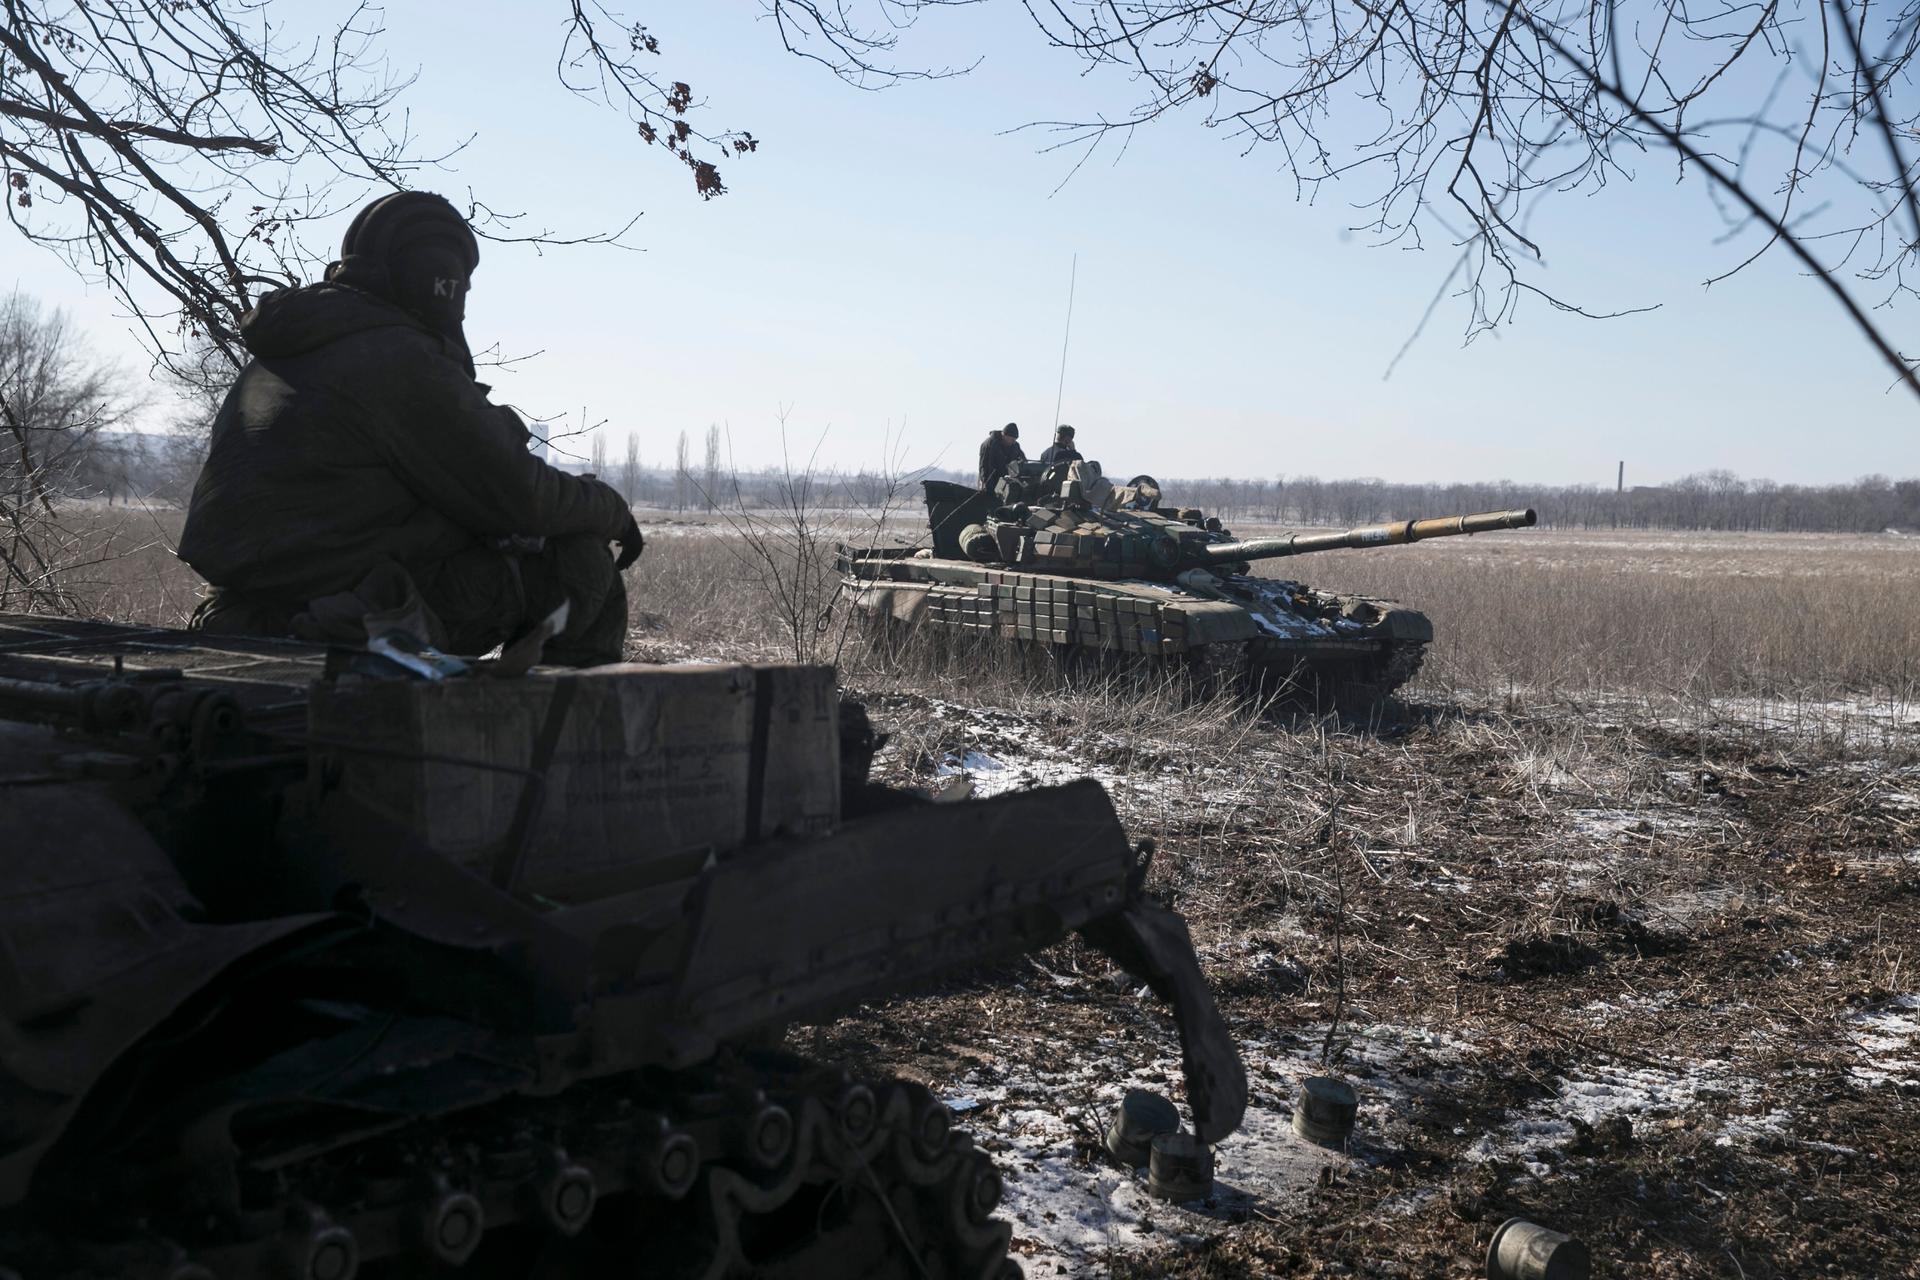 A member of a tank crew from the self-proclaimed Donetsk People's Republic Army sits on top of a tank at a checkpoint on the road from the town of Vuhlehirsk to Debaltseve on February 18, 2015.